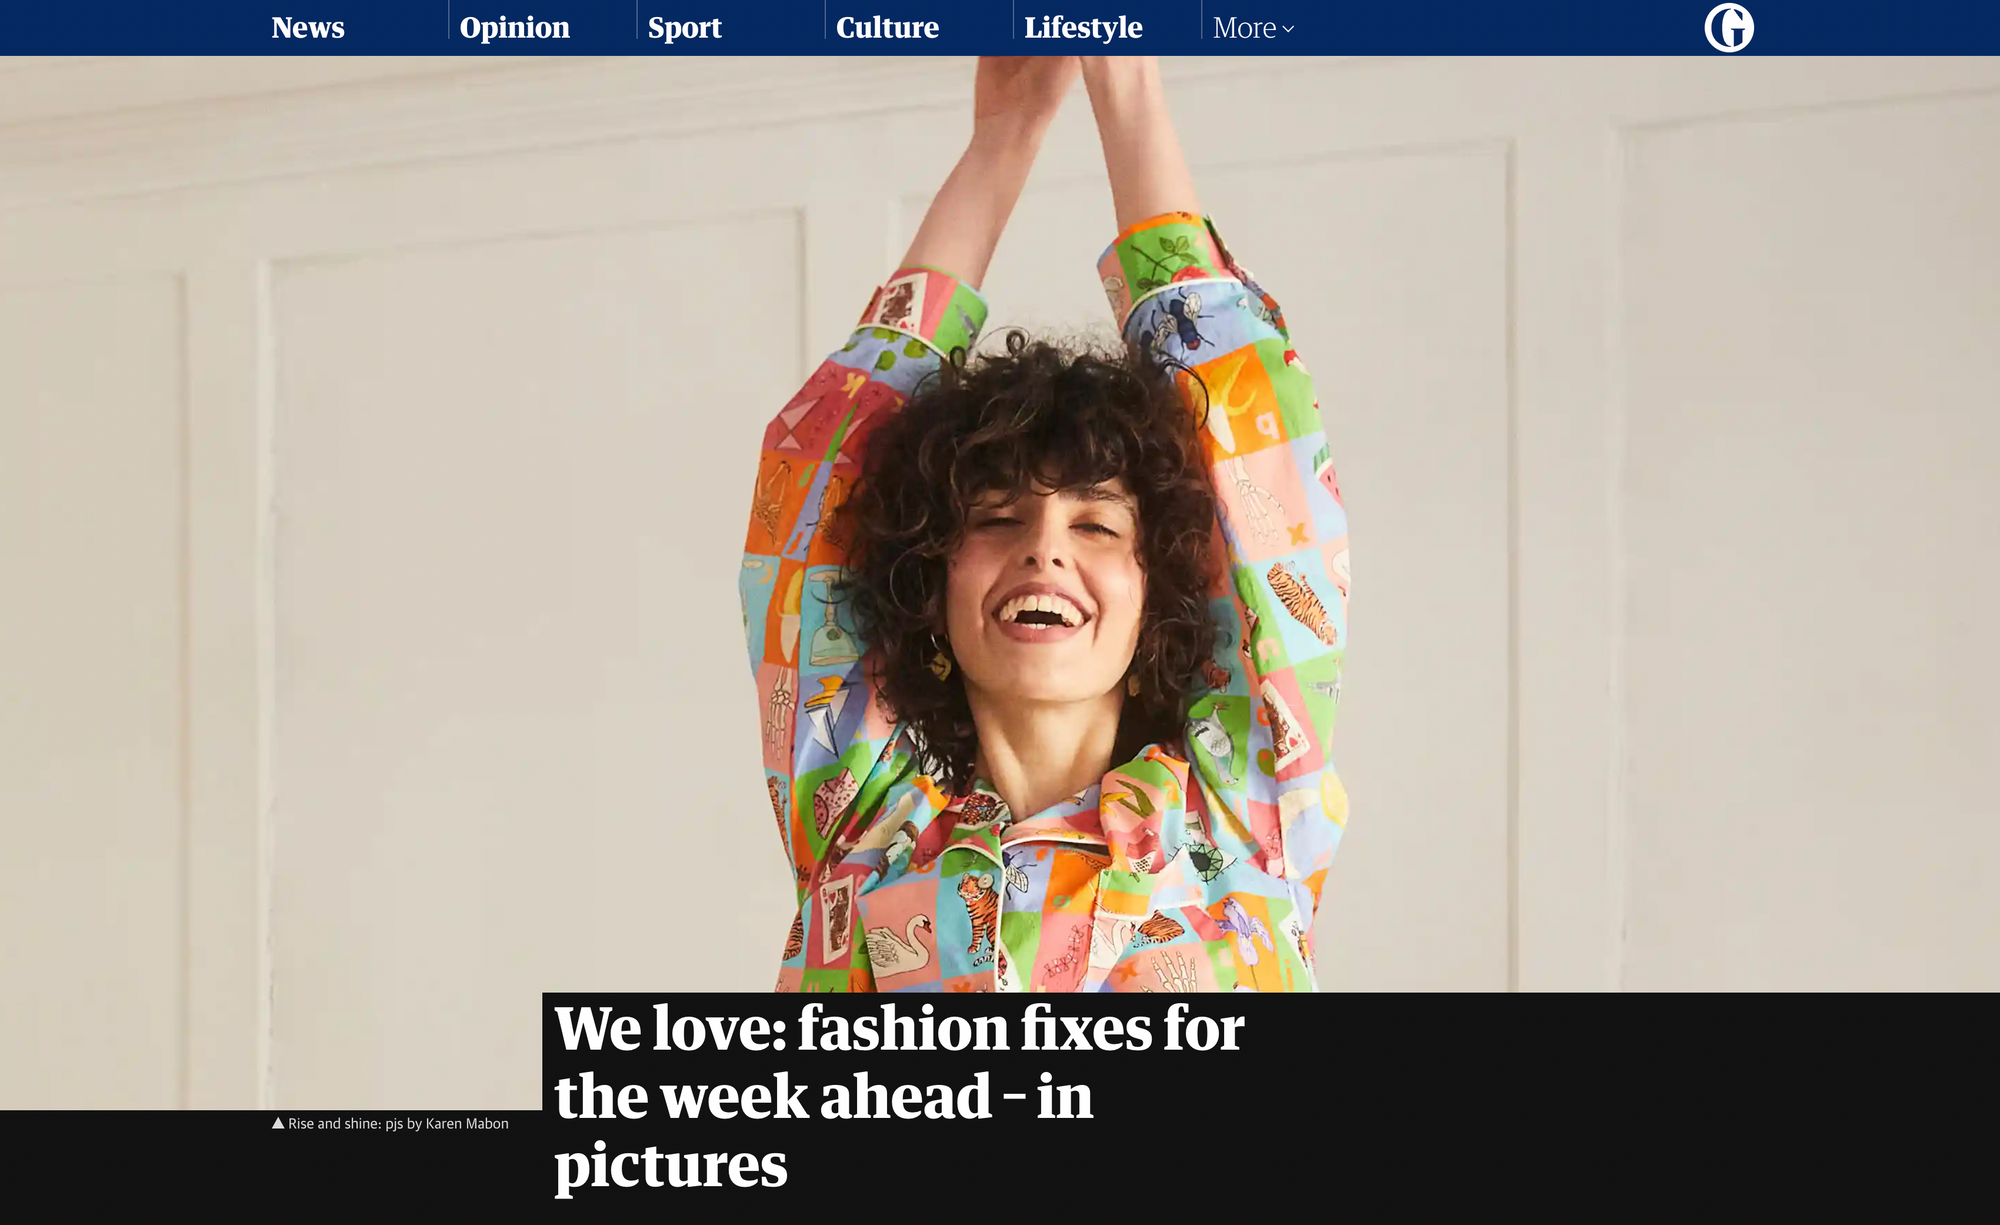 THE GUARDIAN: WE LOVE: FASHION FIXES FOR THE WEEK AHEAD - IN PICTURES